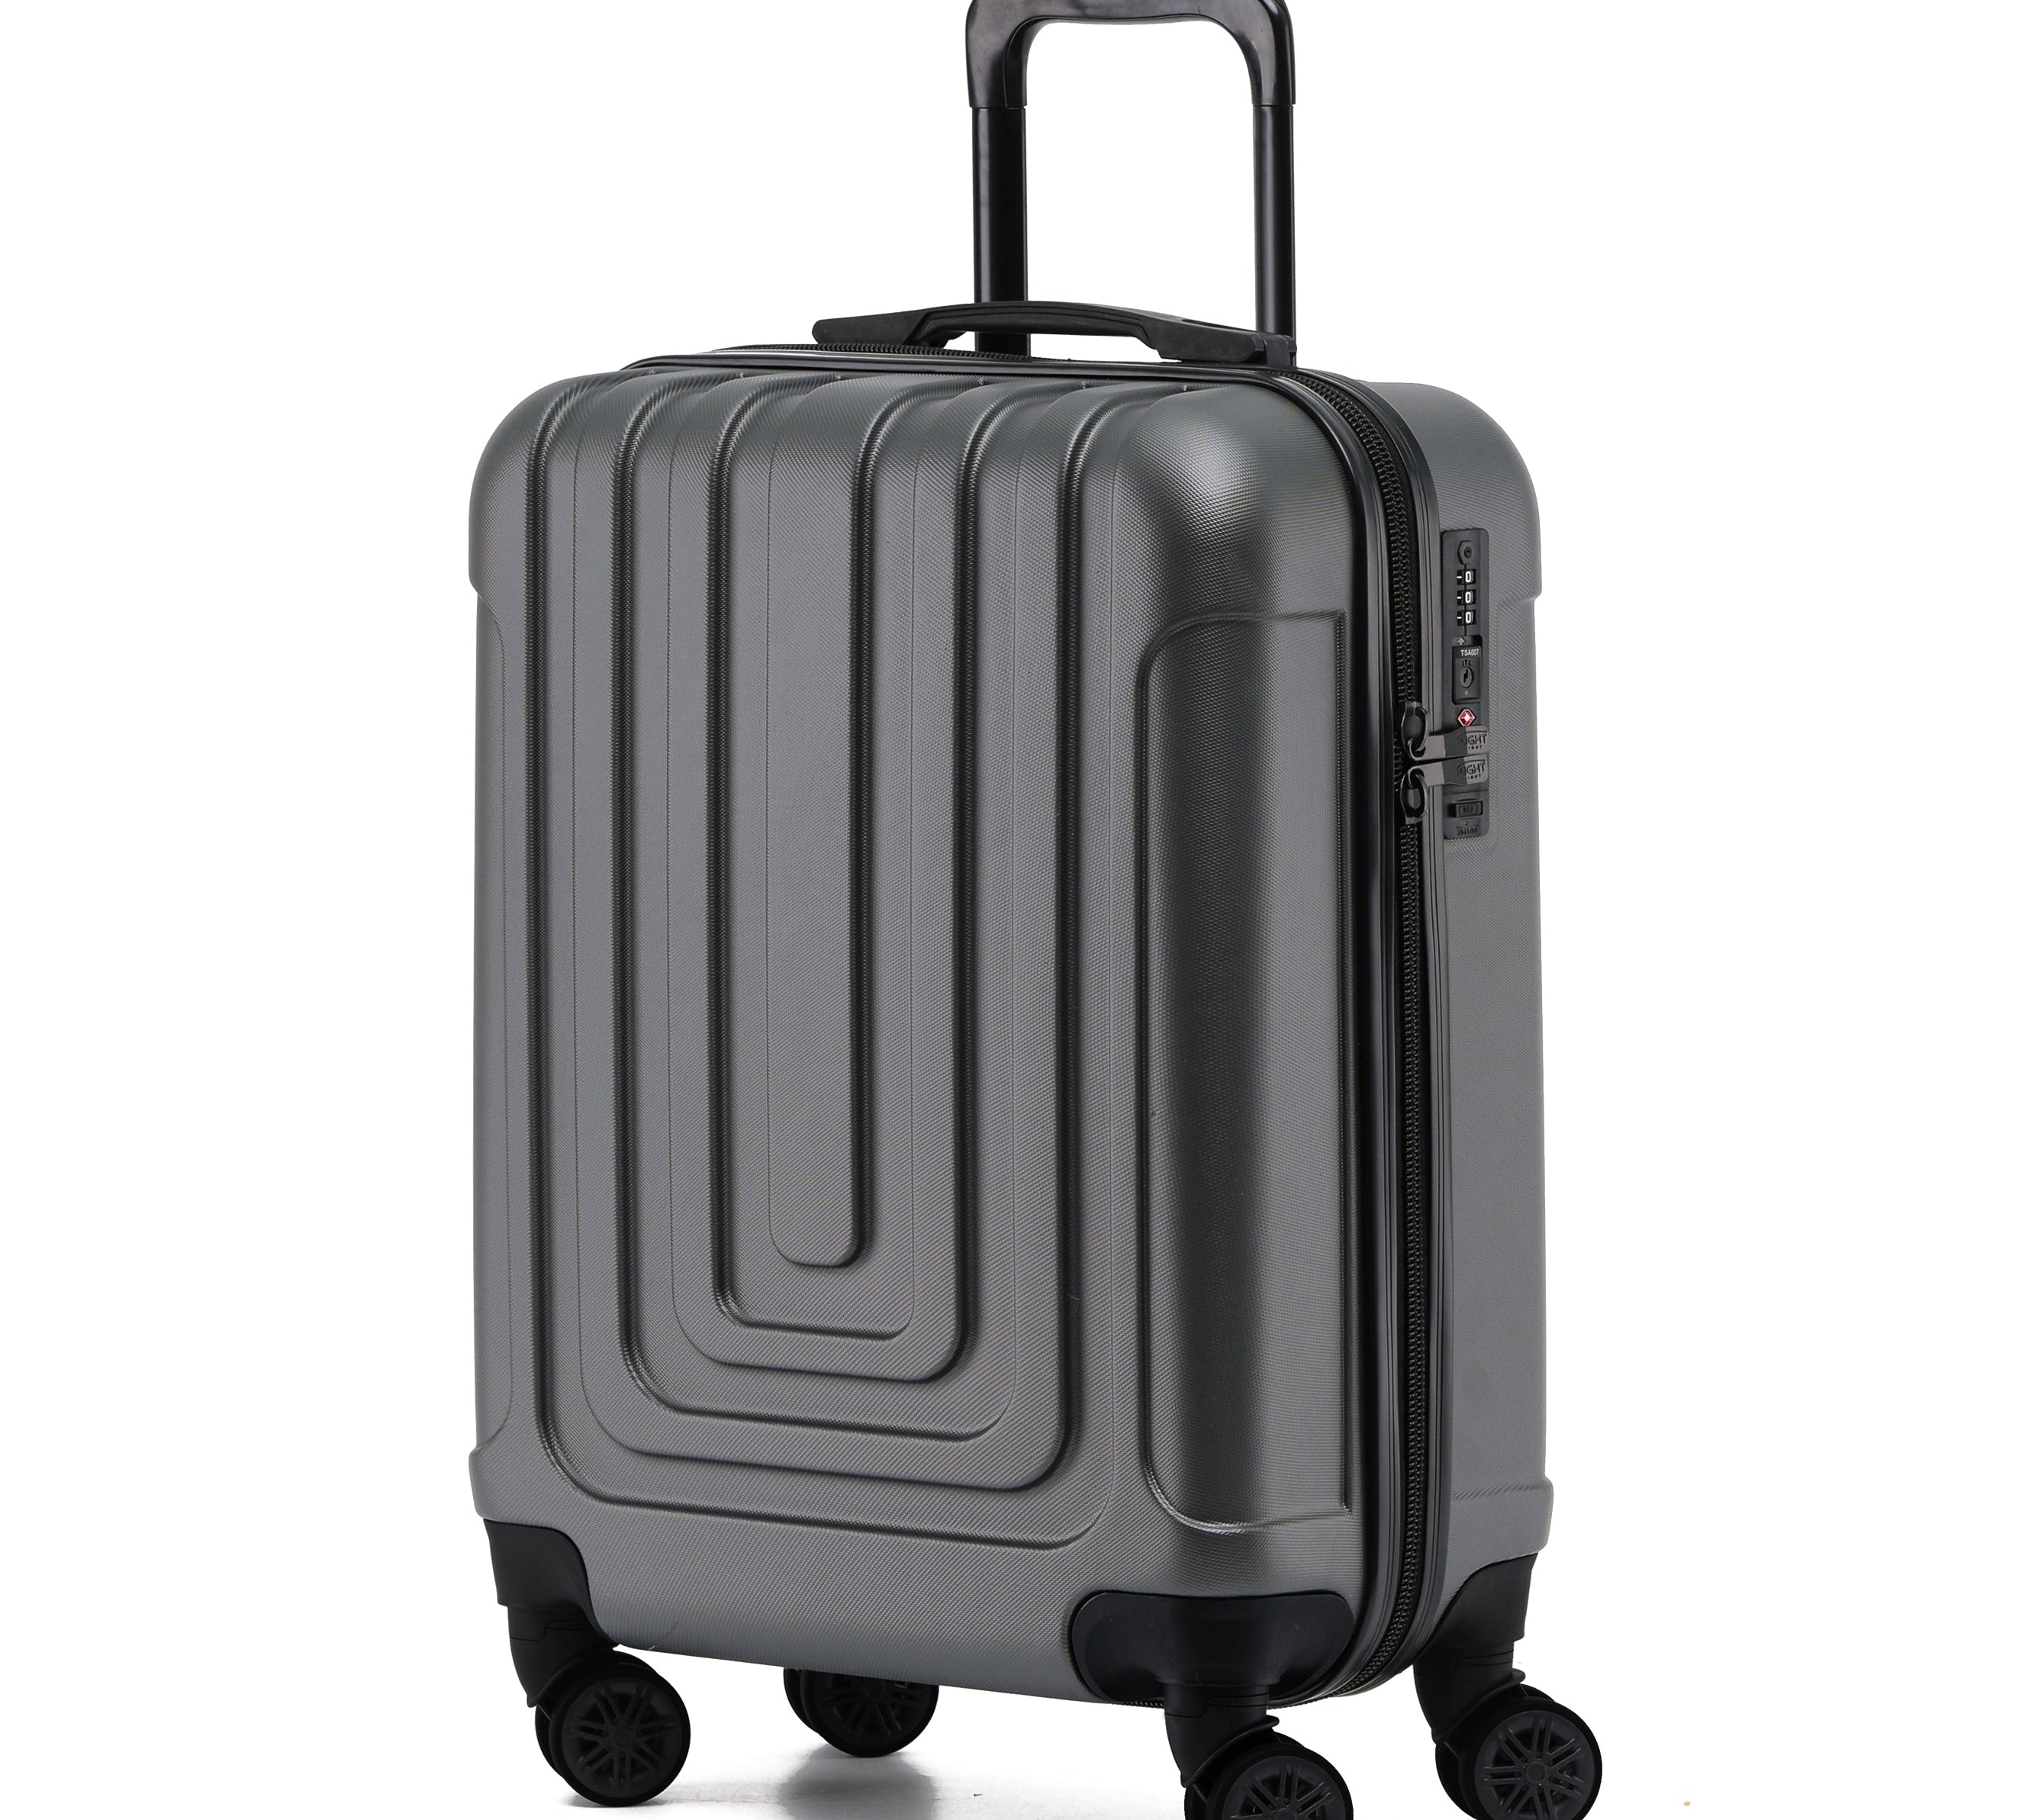 55x40x20cm Premium Hard Shell Lightweight Cabin Suitcase - 8 Spinner Wheels - Built-in TSA Lock & USB Port - Luggage Approved for Over 100 Airlines Including Ryanir (Priority)